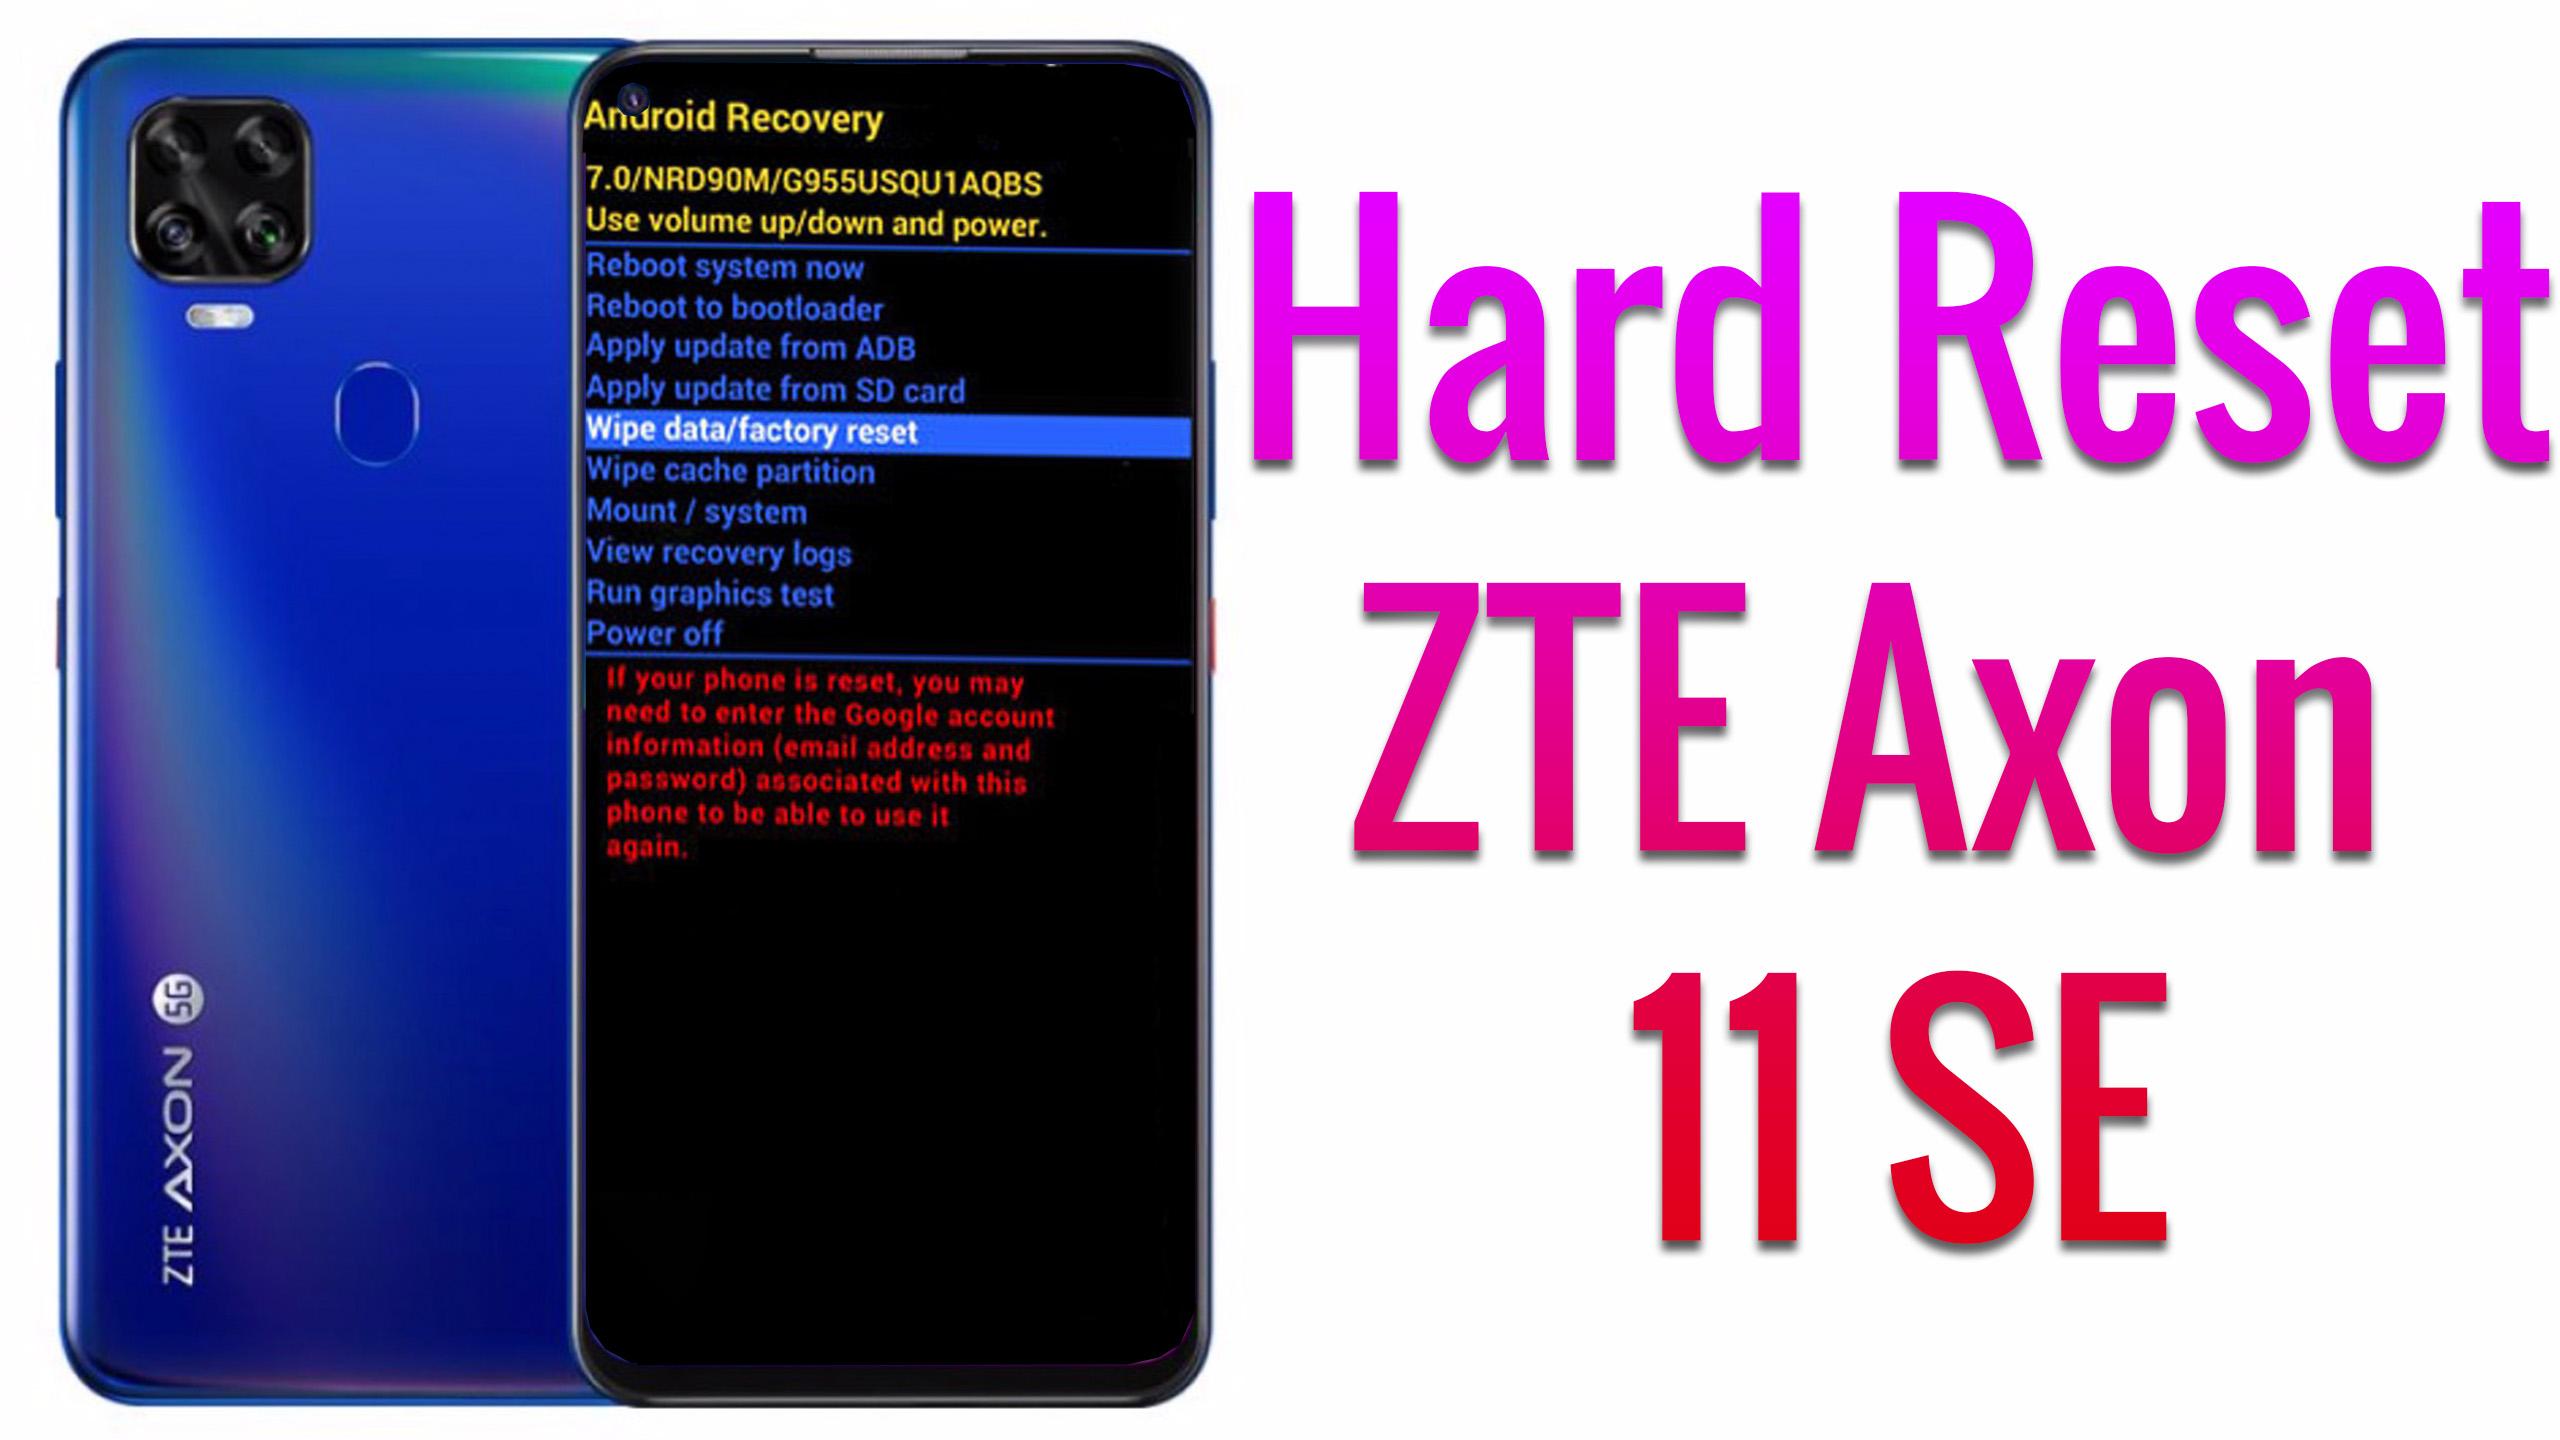 Hard Reset Zte Axon 11 Se Factory Reset Remove Pattern Lock Password How To Guide The Upgrade Guide